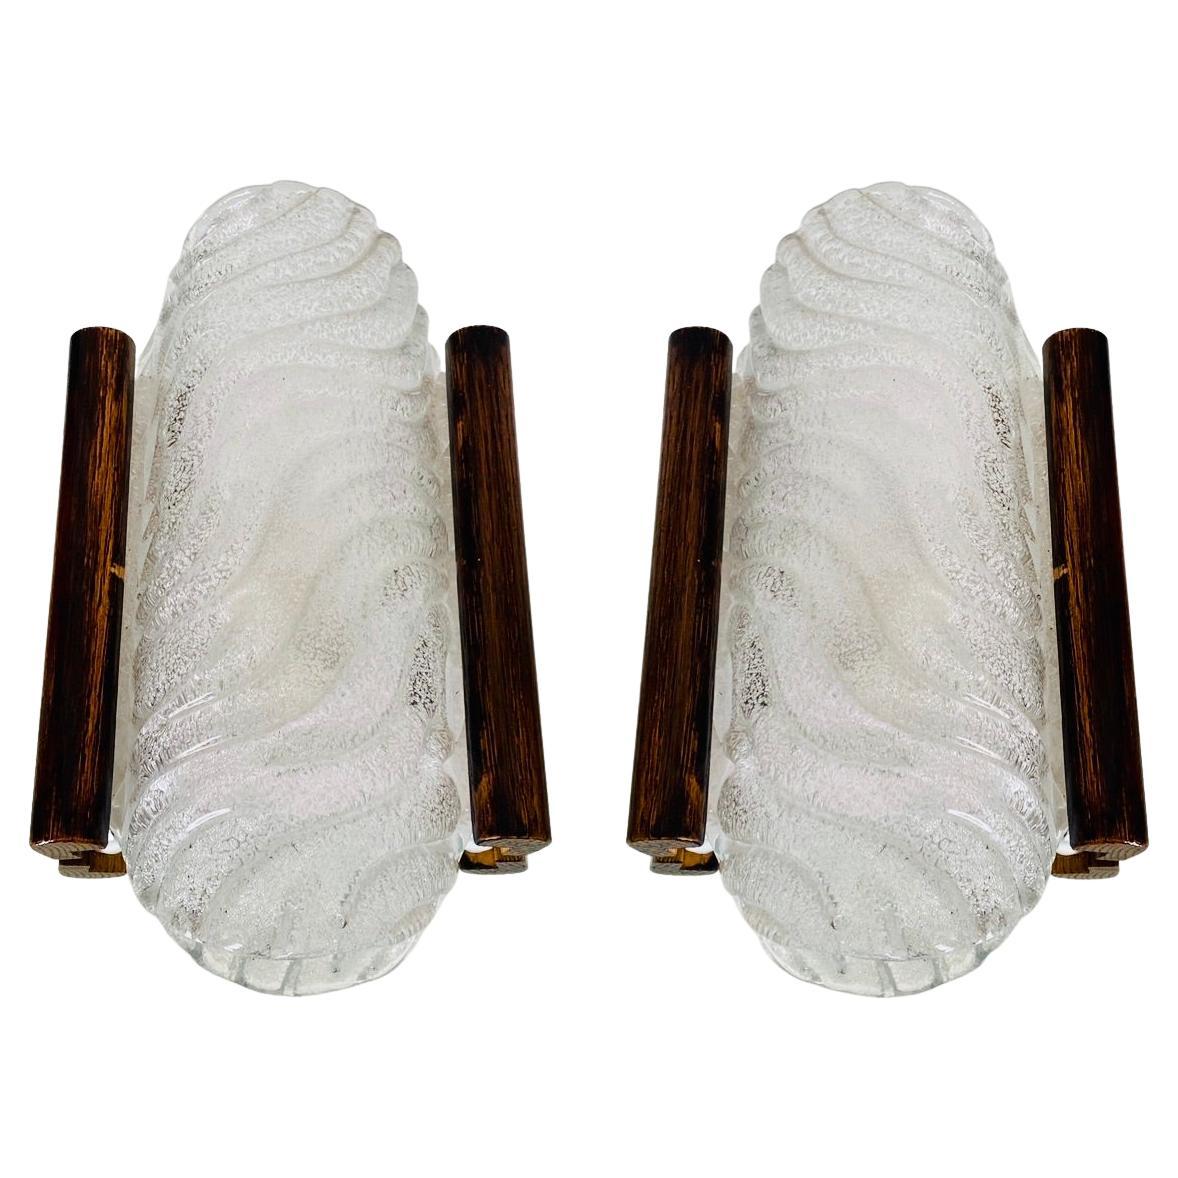 Pair of Barovier & Toso Murano Glass Sconces with Wood Frame, Italy c. 1950 For Sale